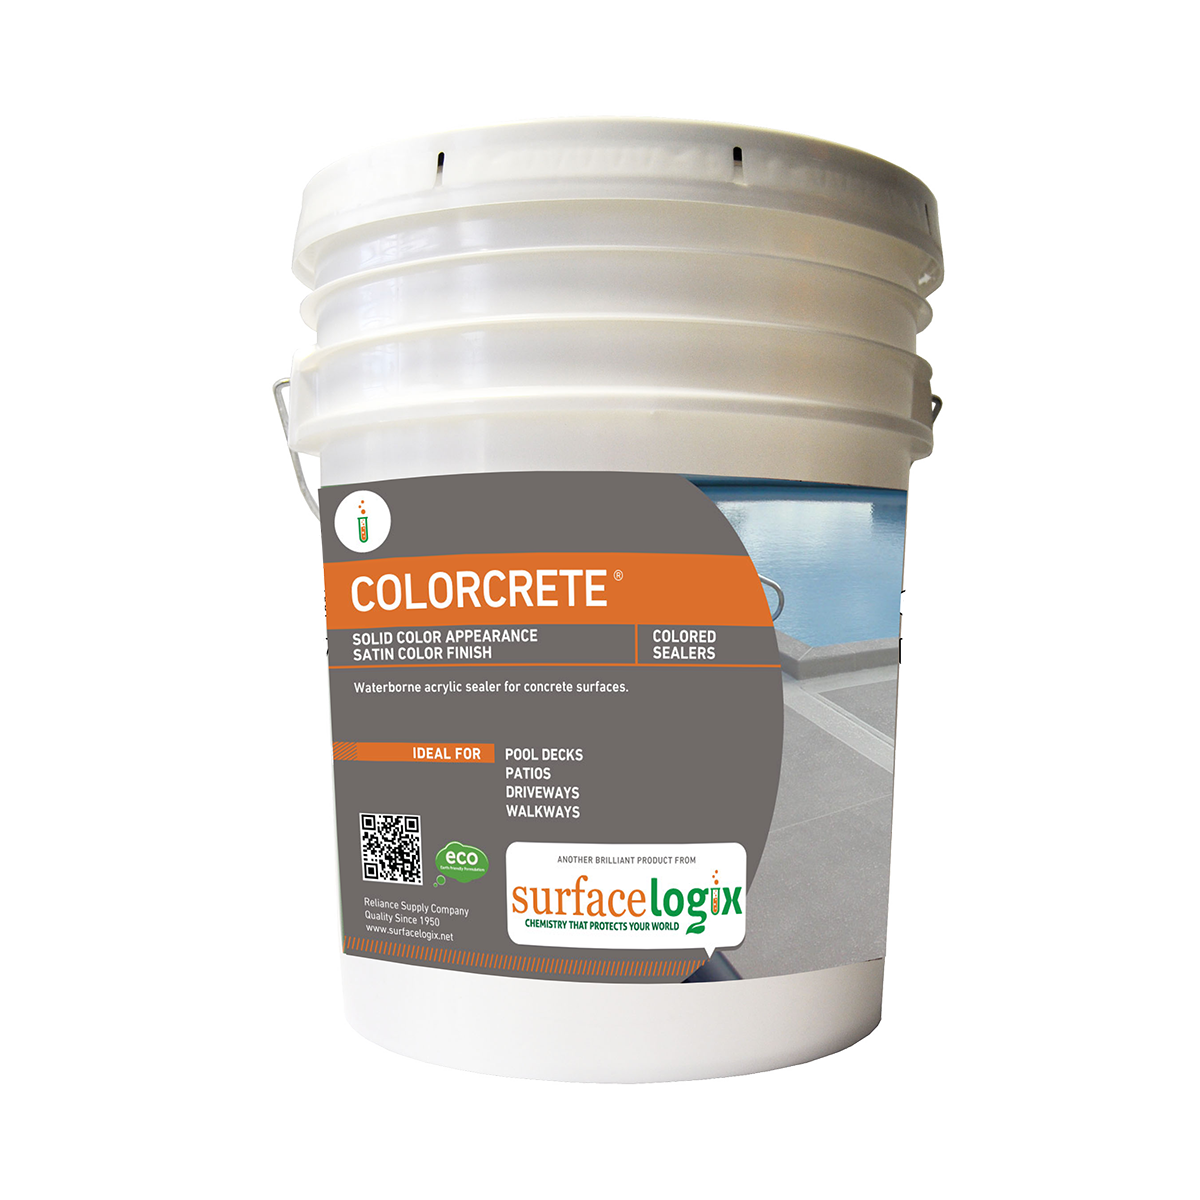 Surfacelogix Colorcrete water based tinted concrete sealer 100% waterborne acrylic resins with hard, semi-gloss film 5gal